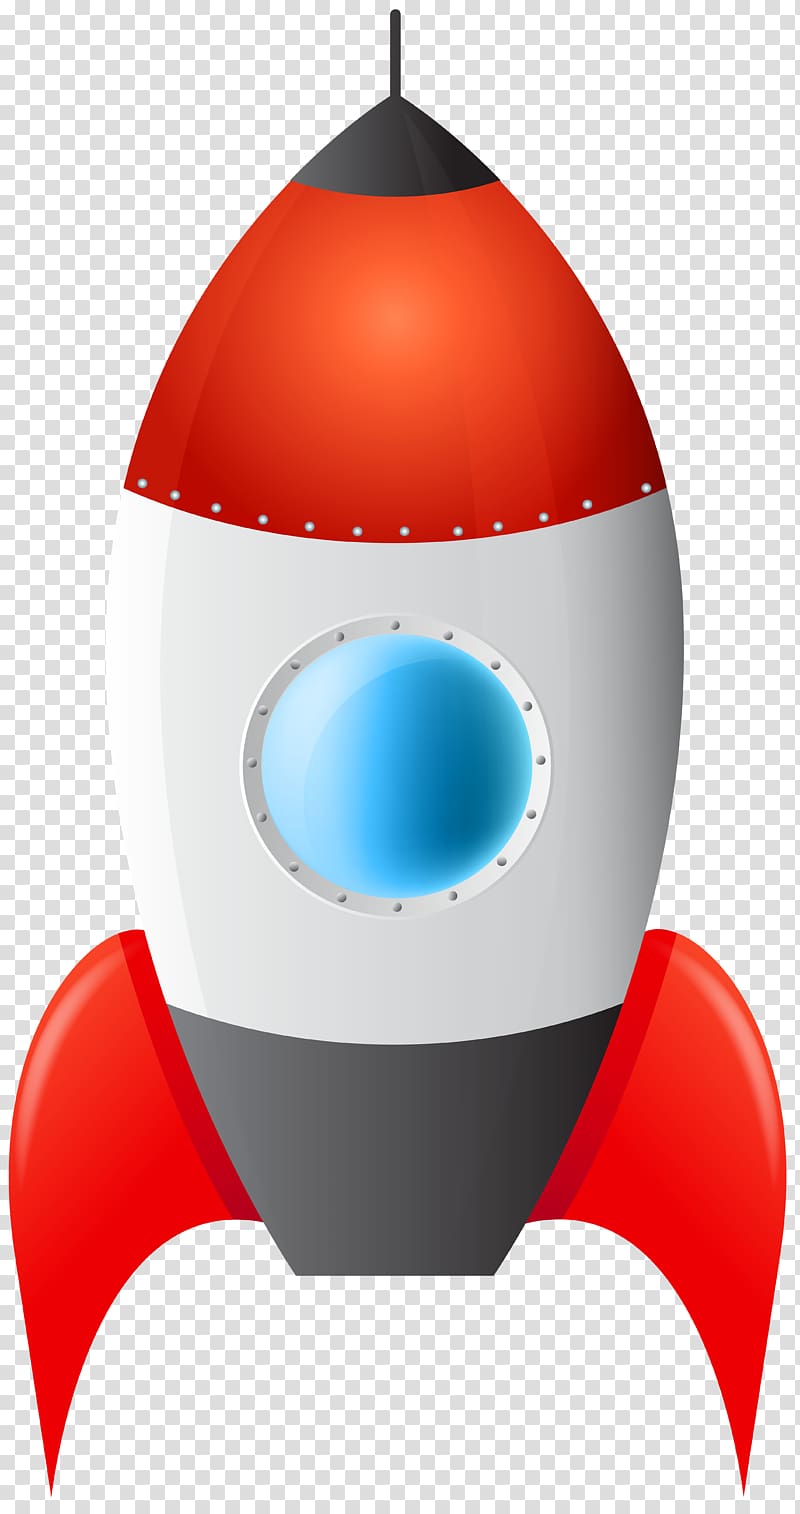 red and gray space shuttle art, Skyrocket , Skyrocket transparent background PNG clipart